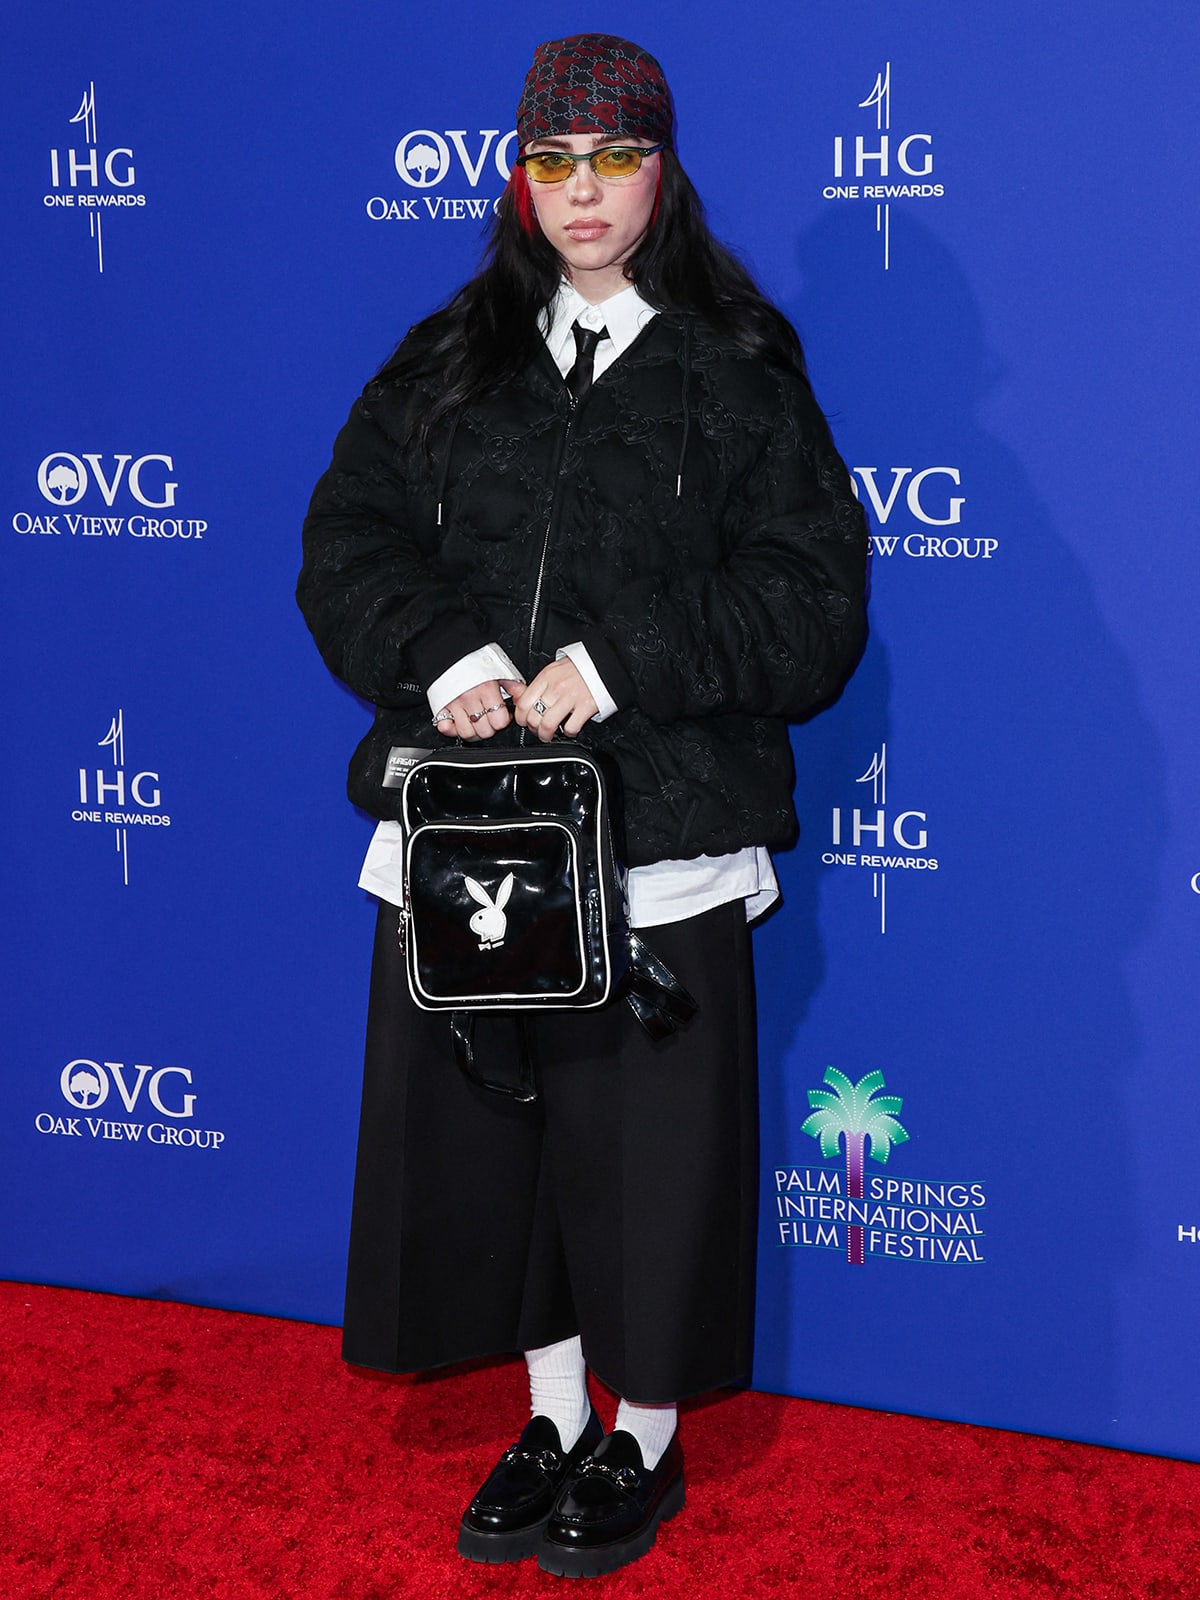 Billie Eilish dons her signature style at the 35th Annual Palm Springs International Film Festival Awards held at the Palm Springs Convention Center on January 4, 2024